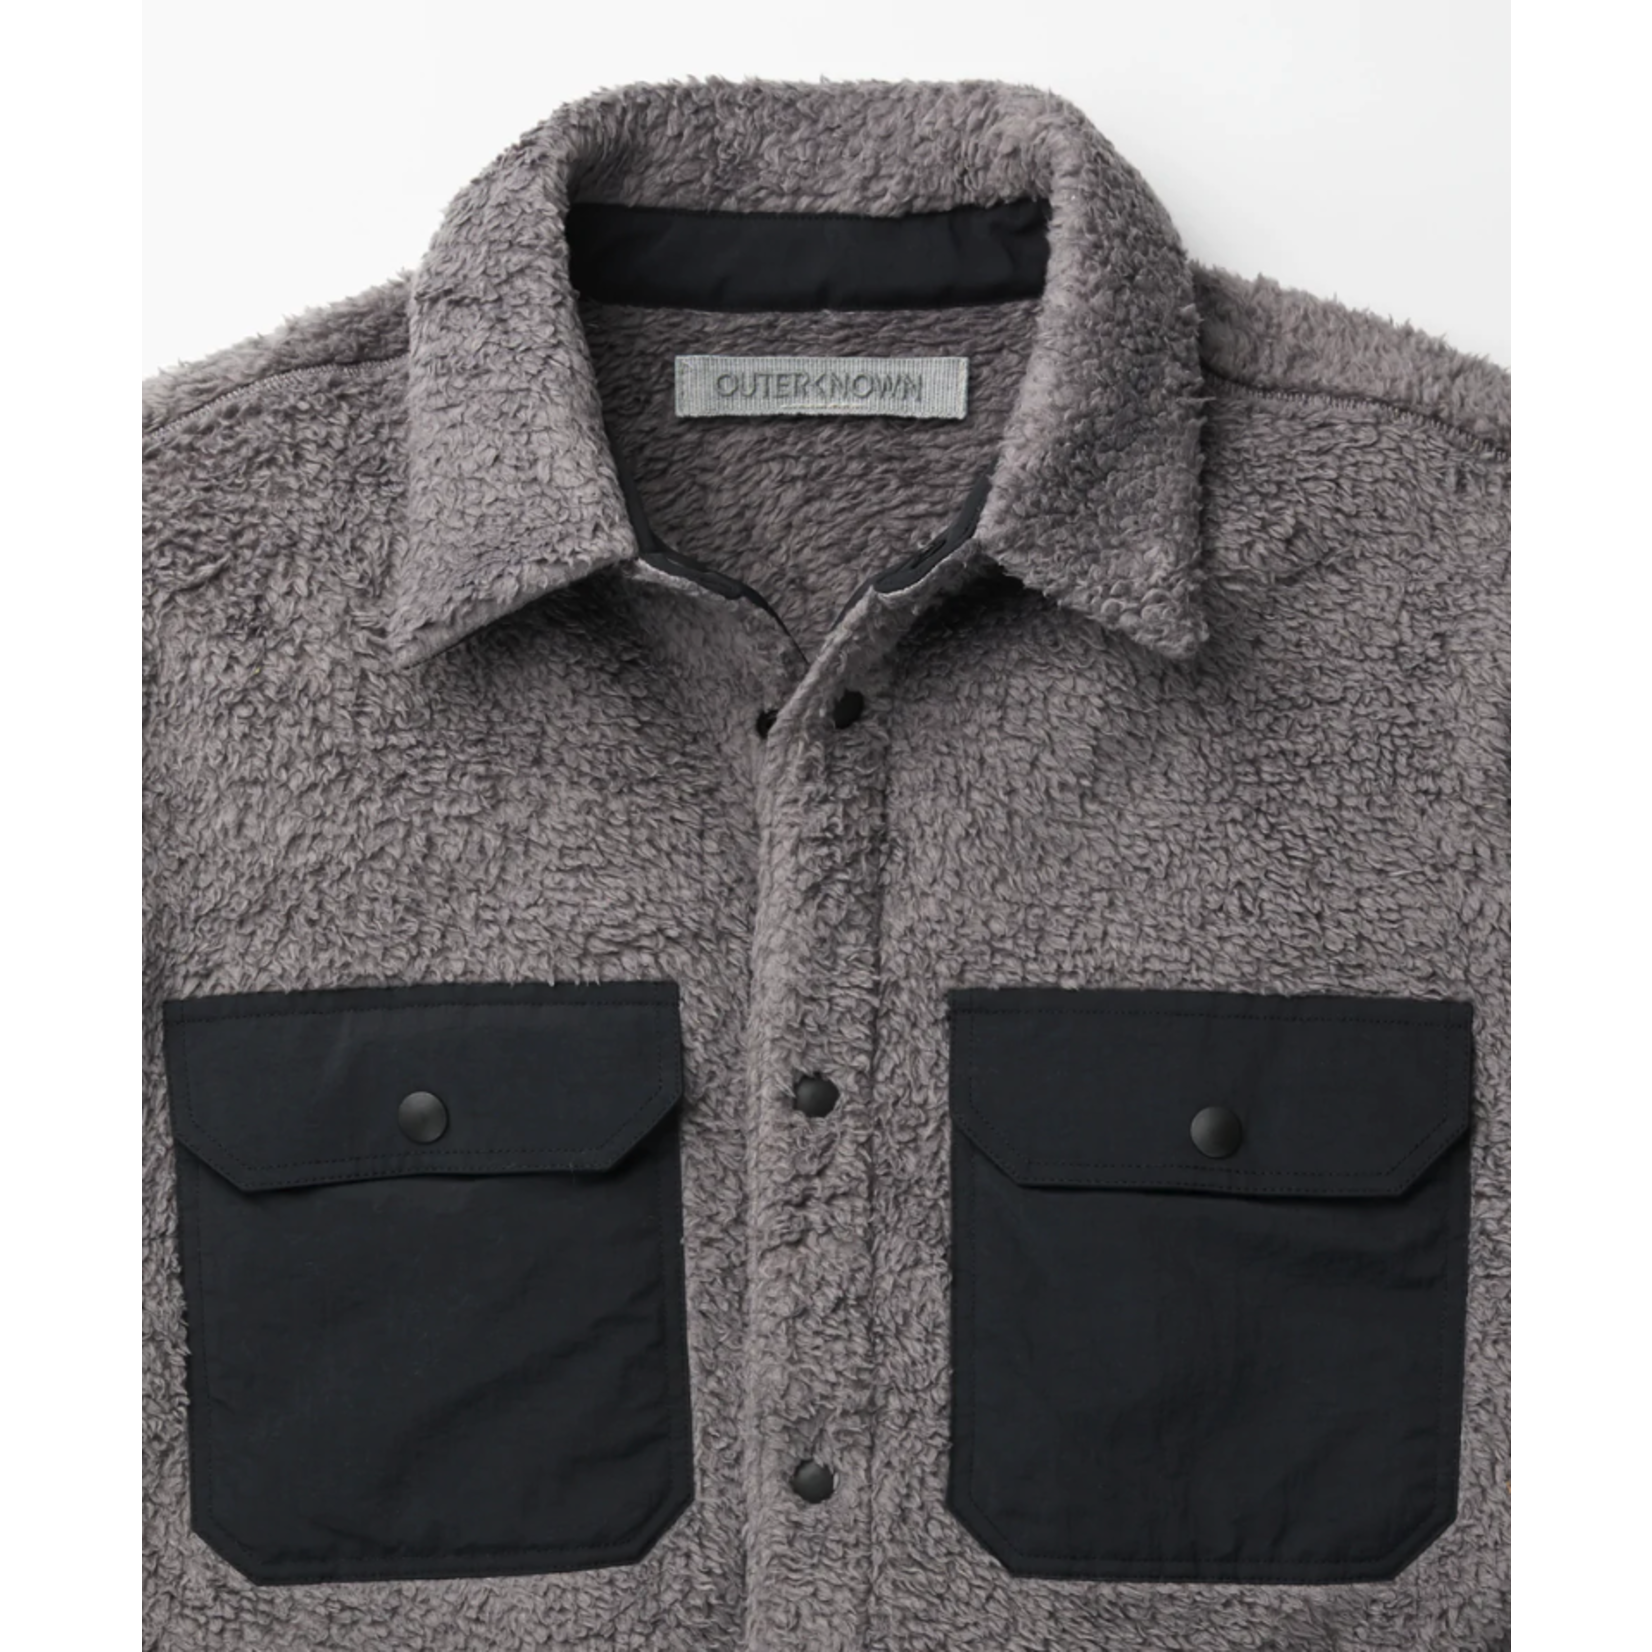 Outerknown Skyline Shirt Jacket